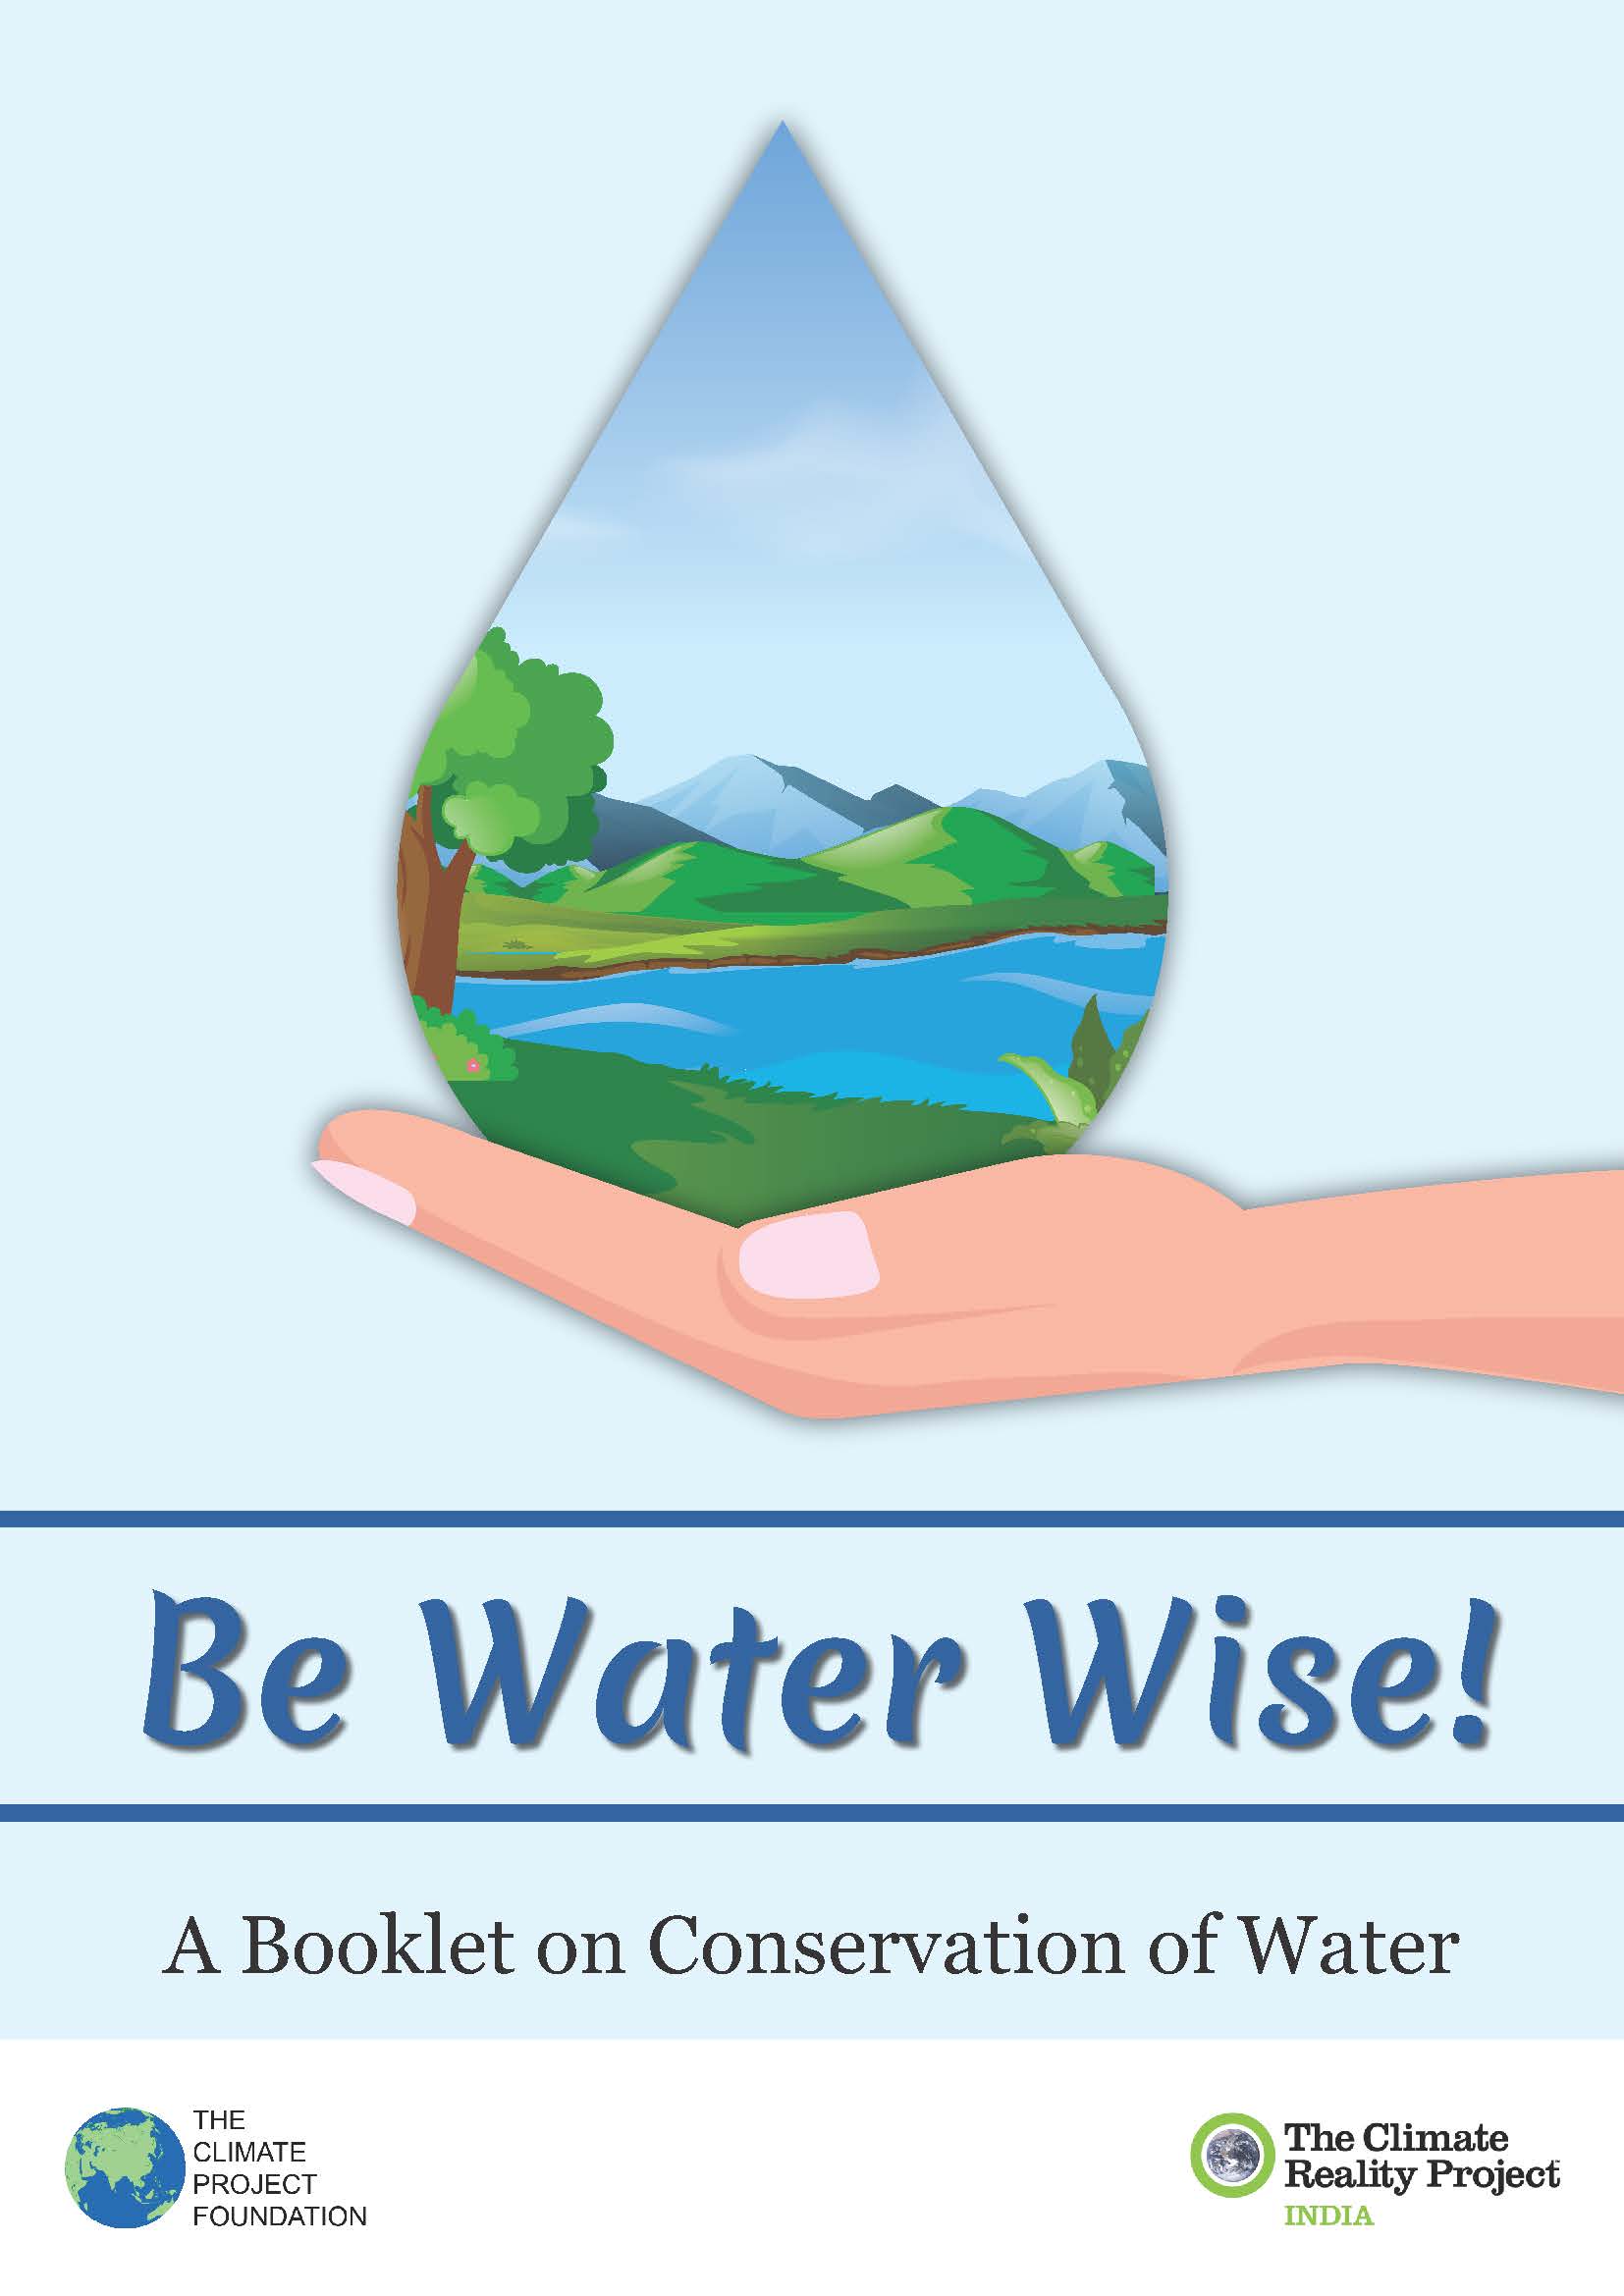 Be water wise!